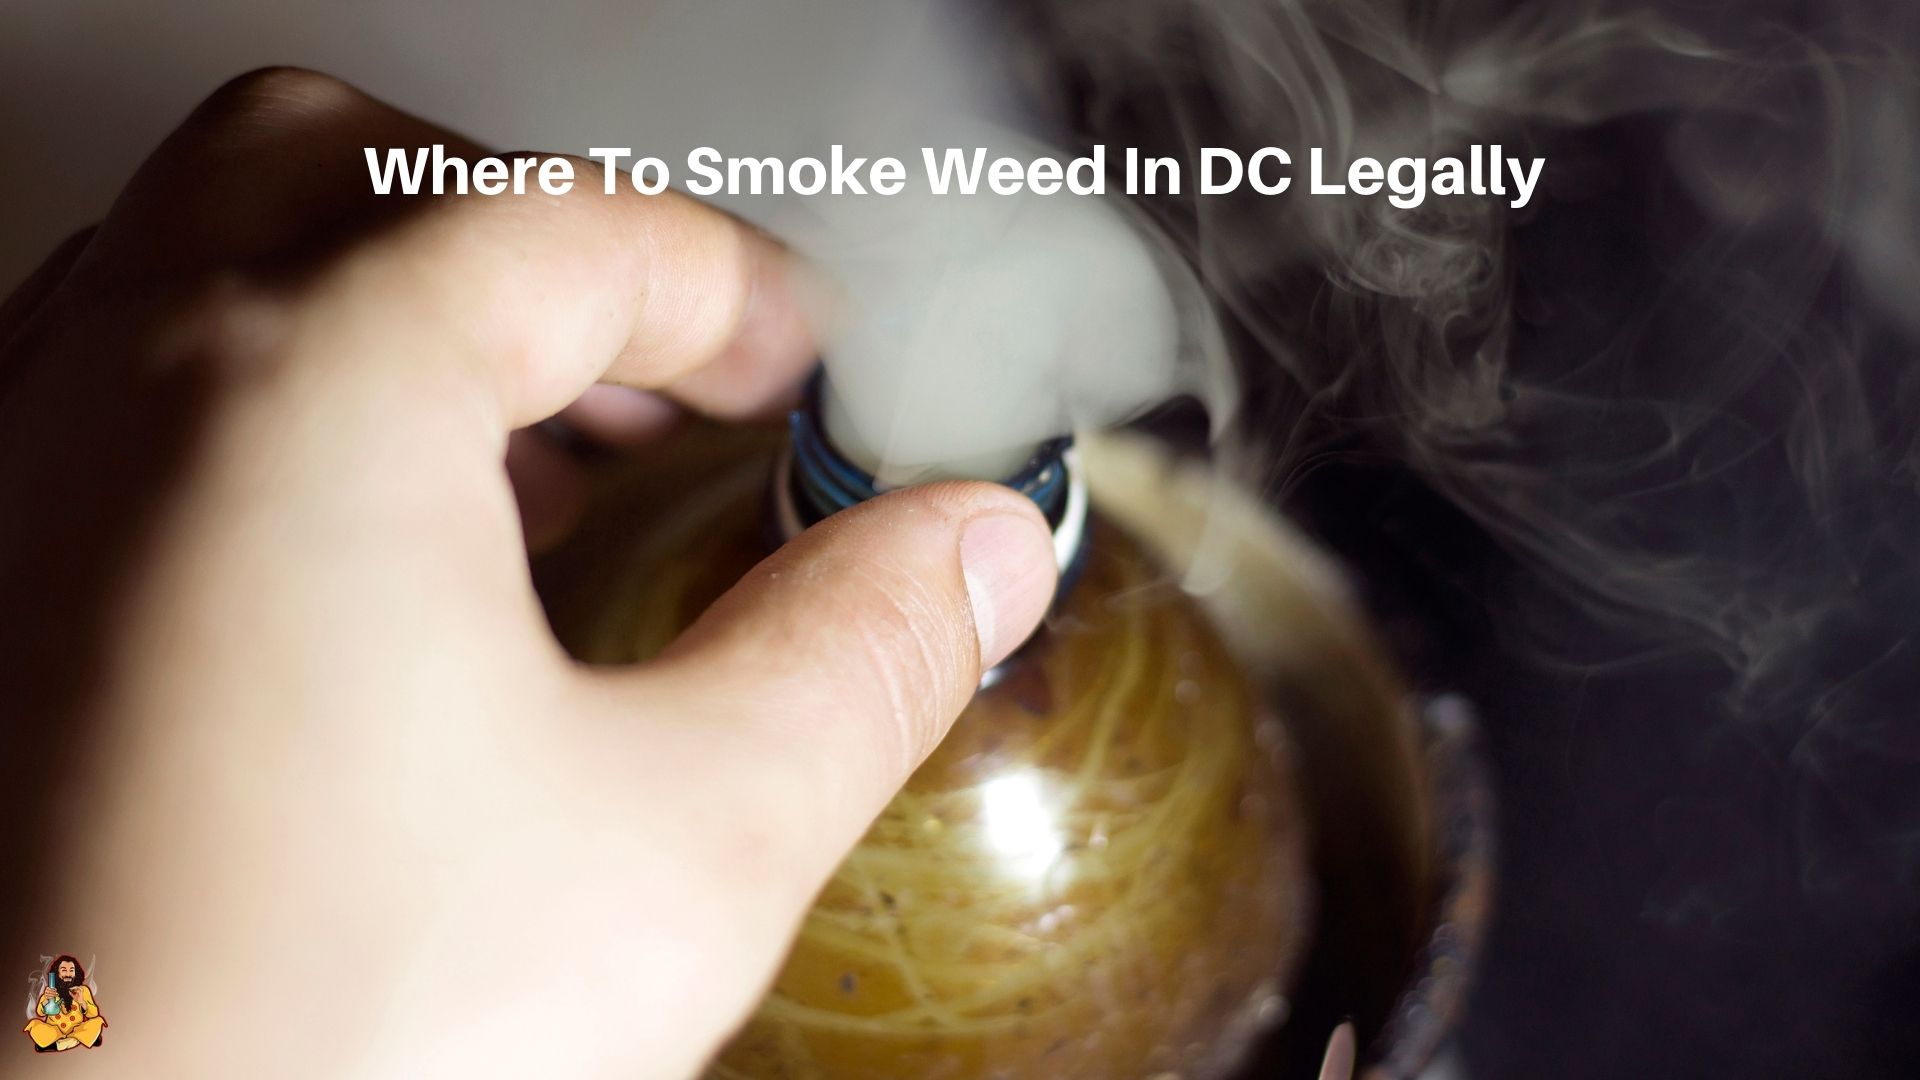 Places to Smoke Weed Legally in D.C.